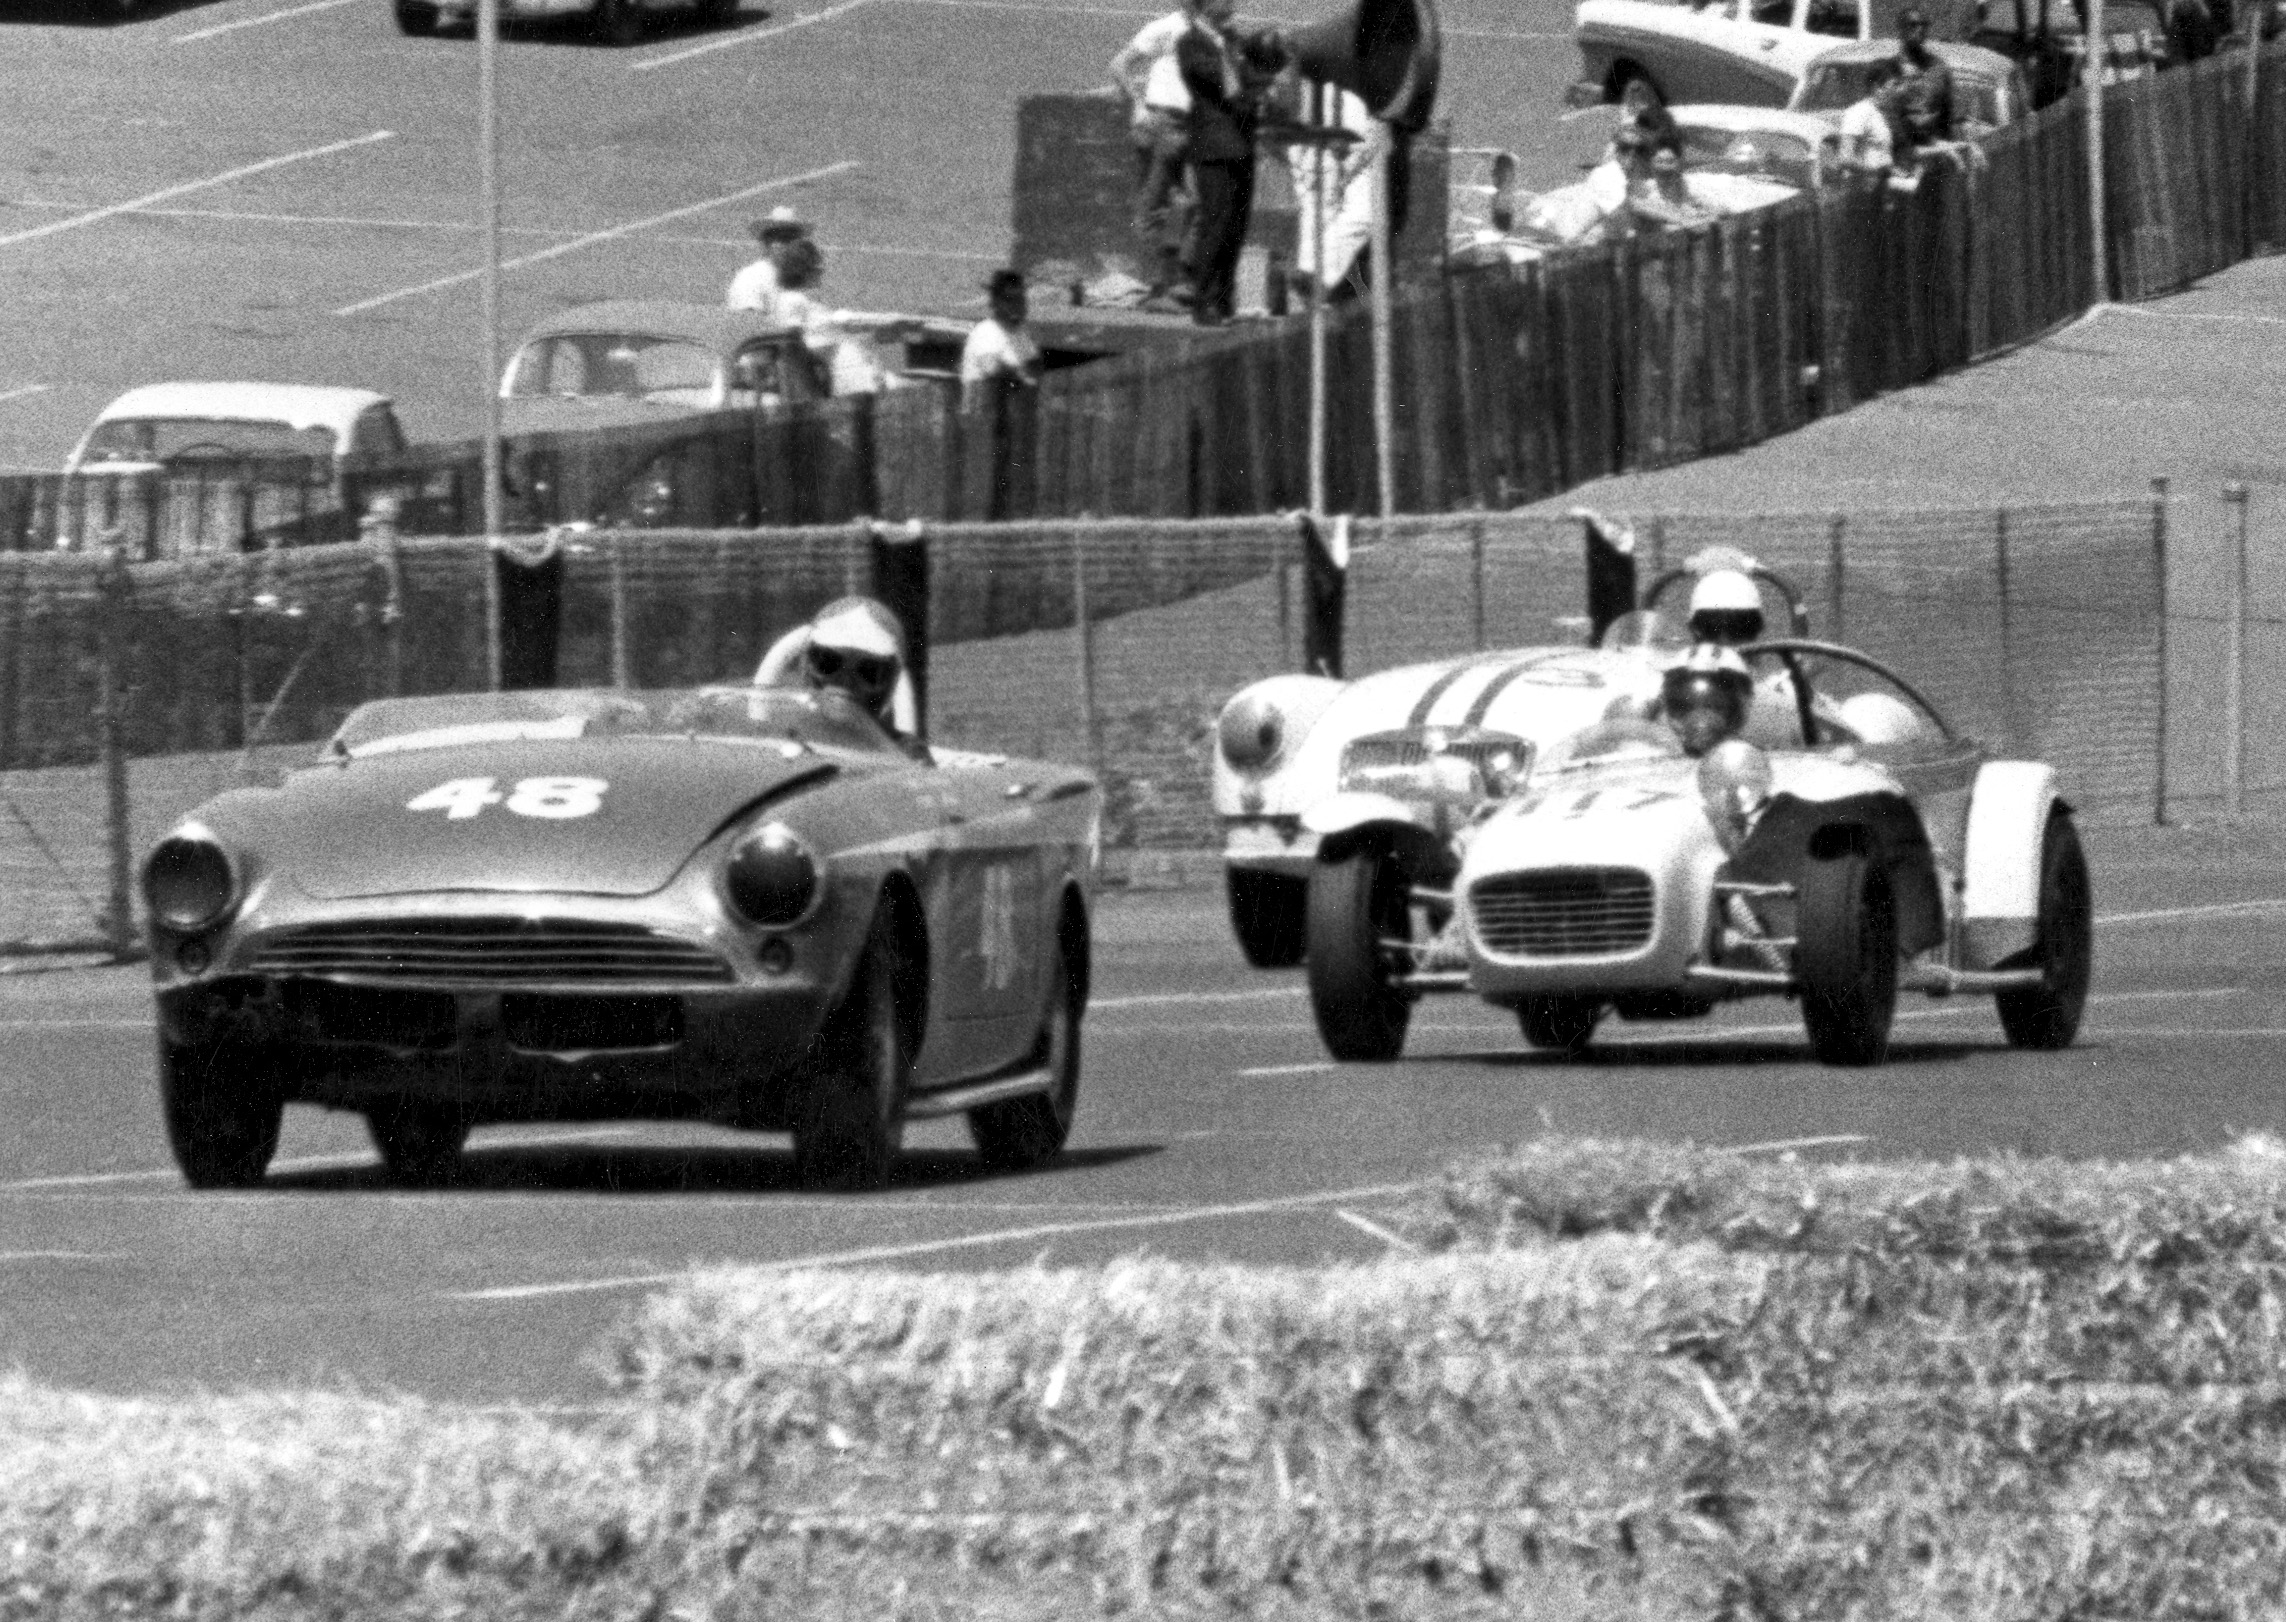 Steve Froines leads Lotus 7 of Ted Herman - Candlestick April 1964